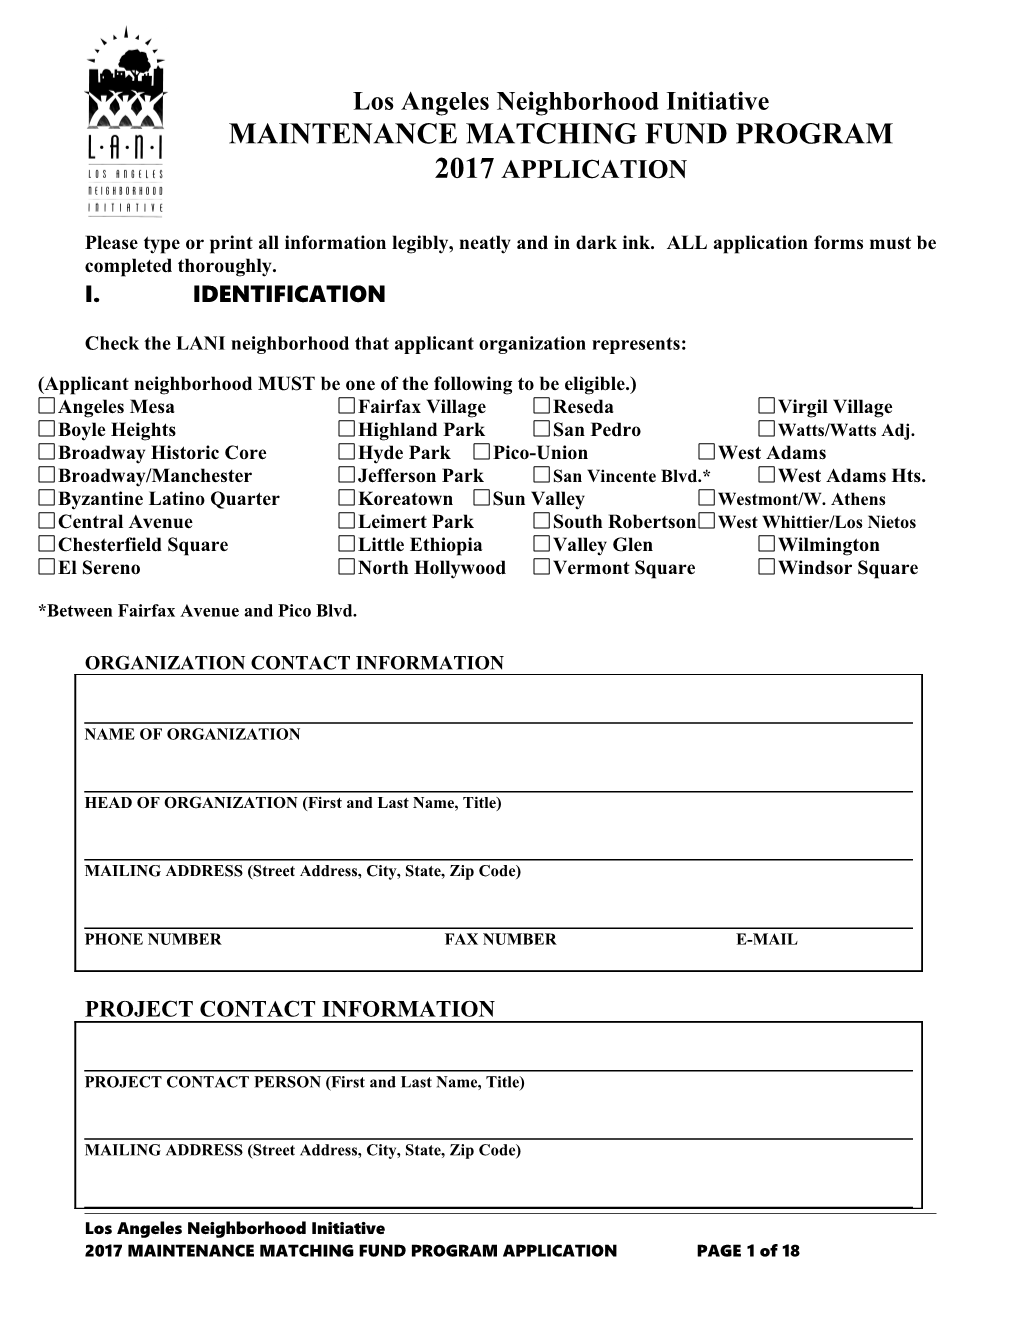 APPLICATION (Being Developed)